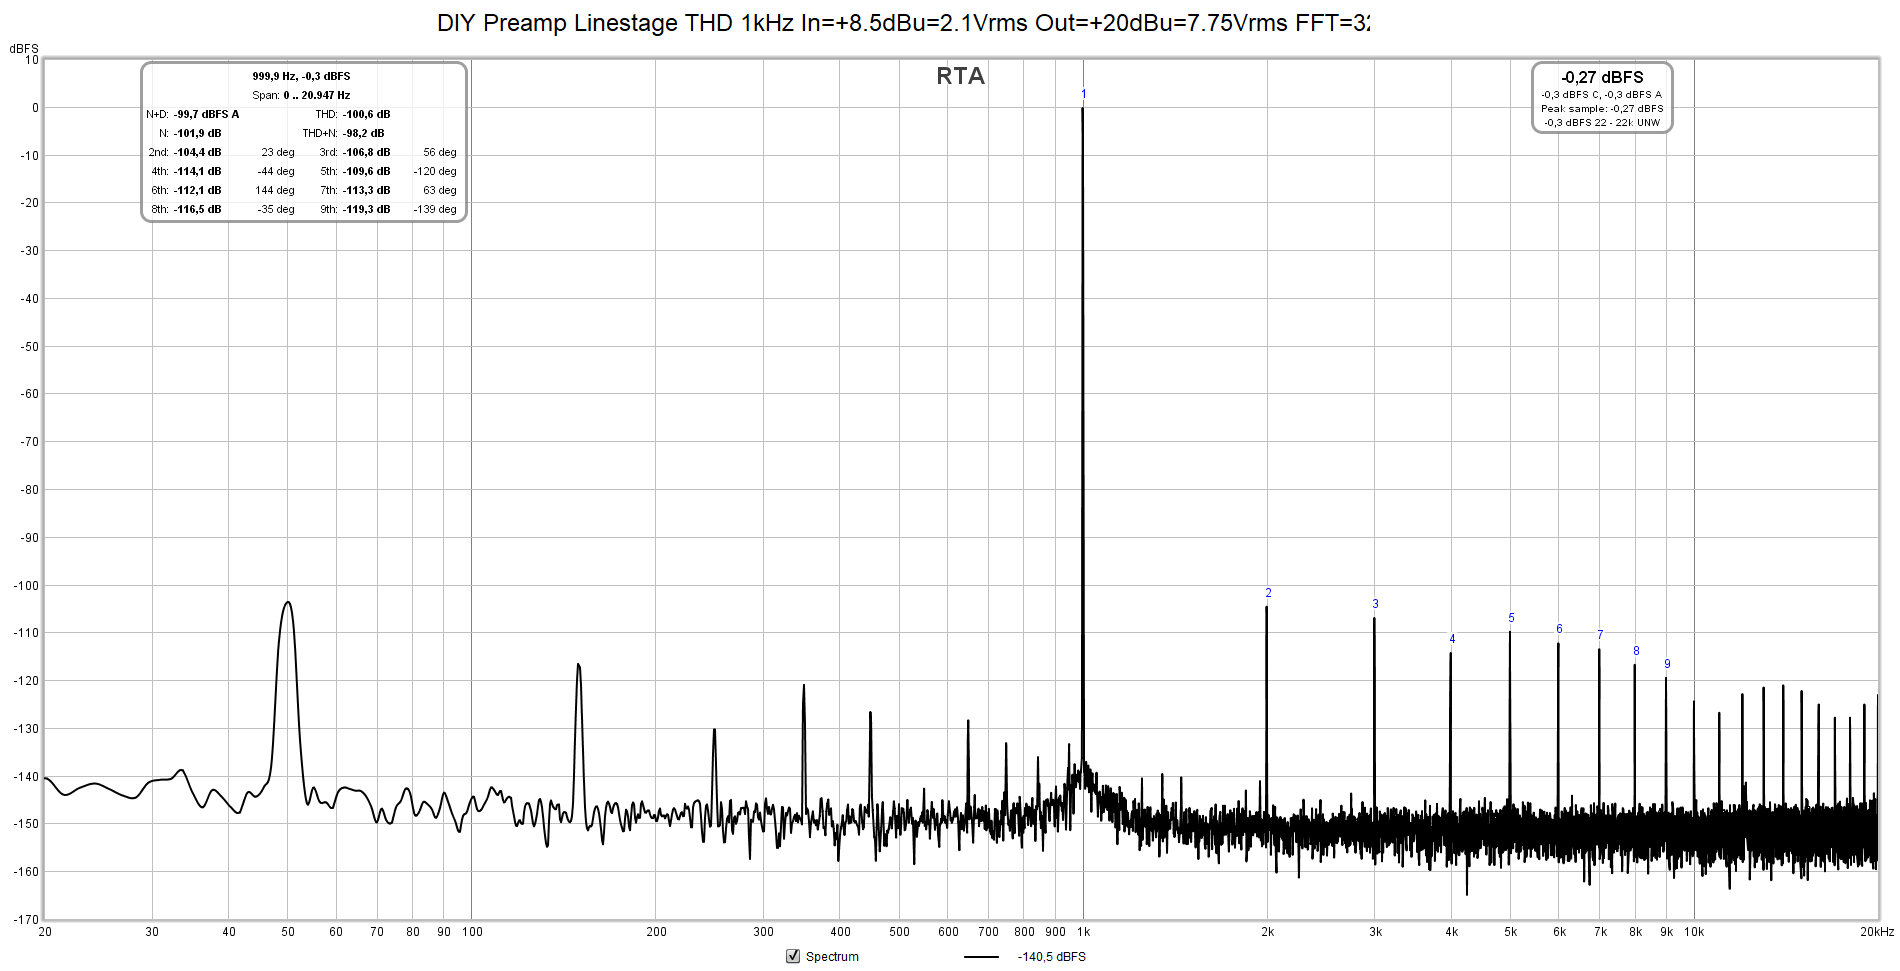 DIY Preamp Linestage THD 1kHz In=+8.5dBu=2.1Vrms Out=+20dBu=7.75Vrms FFT=32k avg=4.png